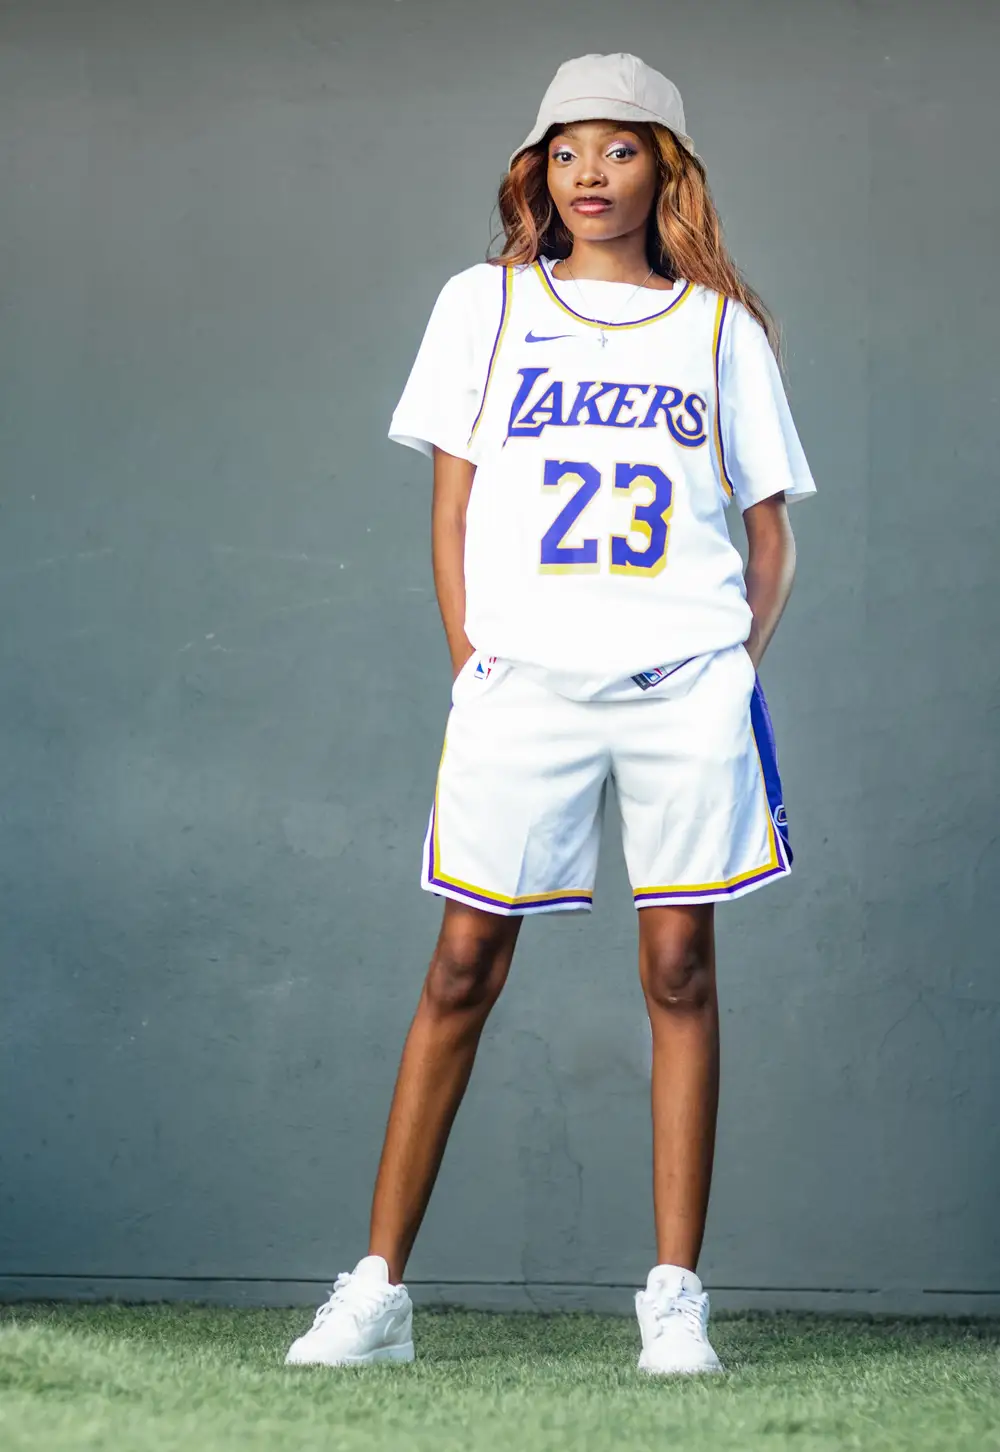 lady in lakers jersey